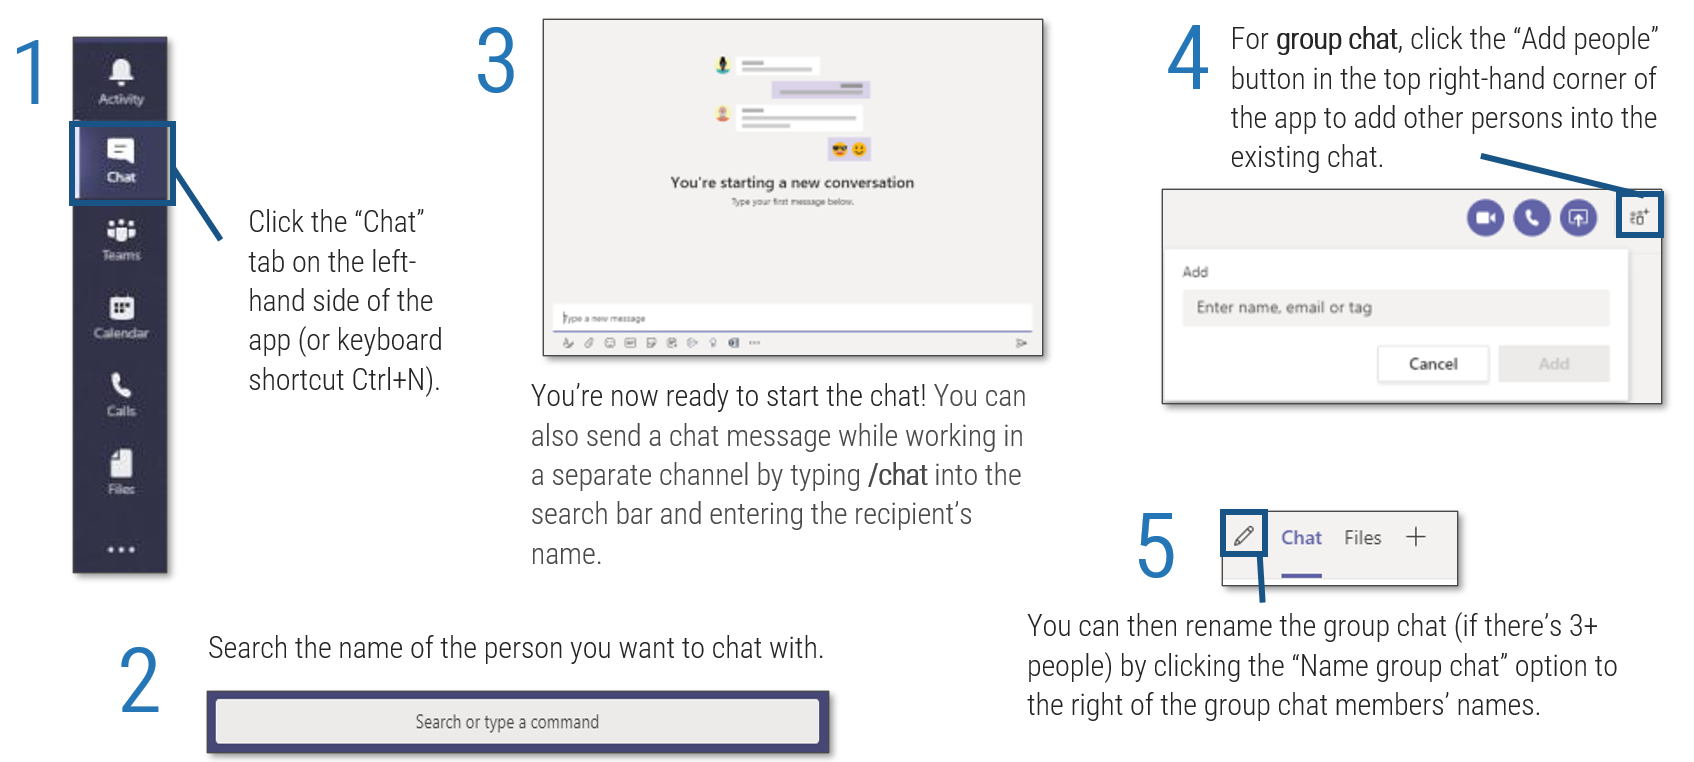 Screenshots detailing how to create a chat in Microsoft Teams, steps 1 to 5. Step 1:'Click the “Chat” tab on the left hand side of the app (or keyboard shortcut Ctrl+N)'. Step 2: 'Search the name of the person you want to chat with'. Step 3: 'You’re now ready to start the chat! You can also send a chat message while working in a separate channel by typing/chat into the search bar and entering the recipient’s name'. Step 4: 'For group chat, click the “Add people” button in the top right hand corner of the app to add other persons into the existing chat'. Step 5: 'You can then rename the group chat (if there are 3+ people) by clicking the “Name group chat” option to the right of the group chat members’ names'.